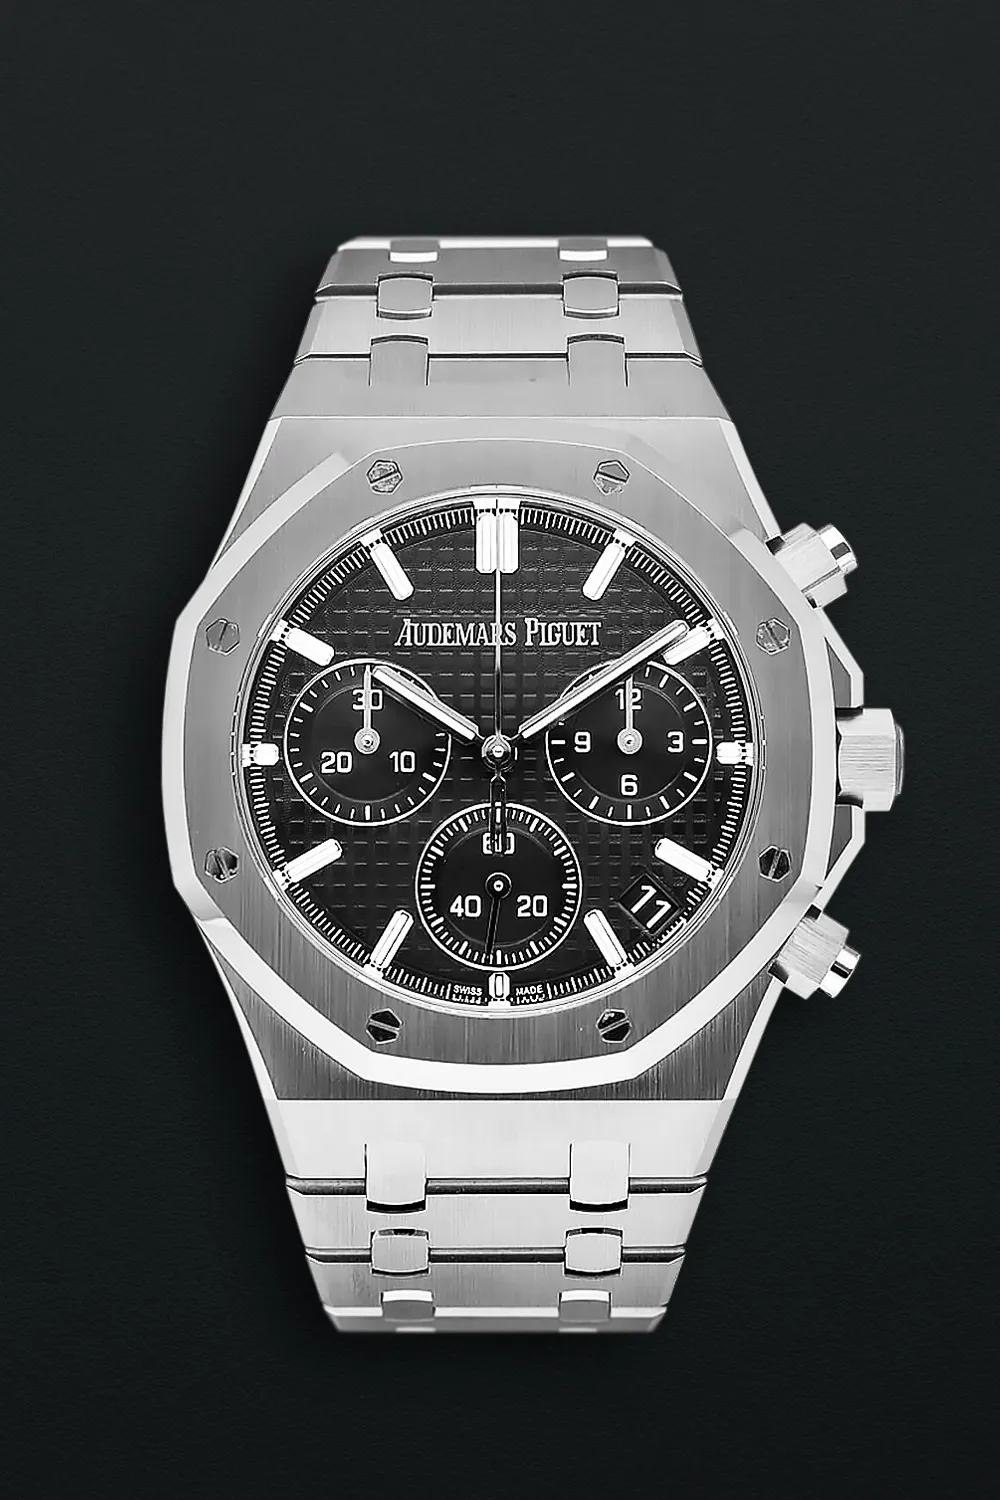 Audemars Piguet Royal Oak Chronograph 26240ST.OO.1320ST.02 41mm Stainless steel and white gold Black